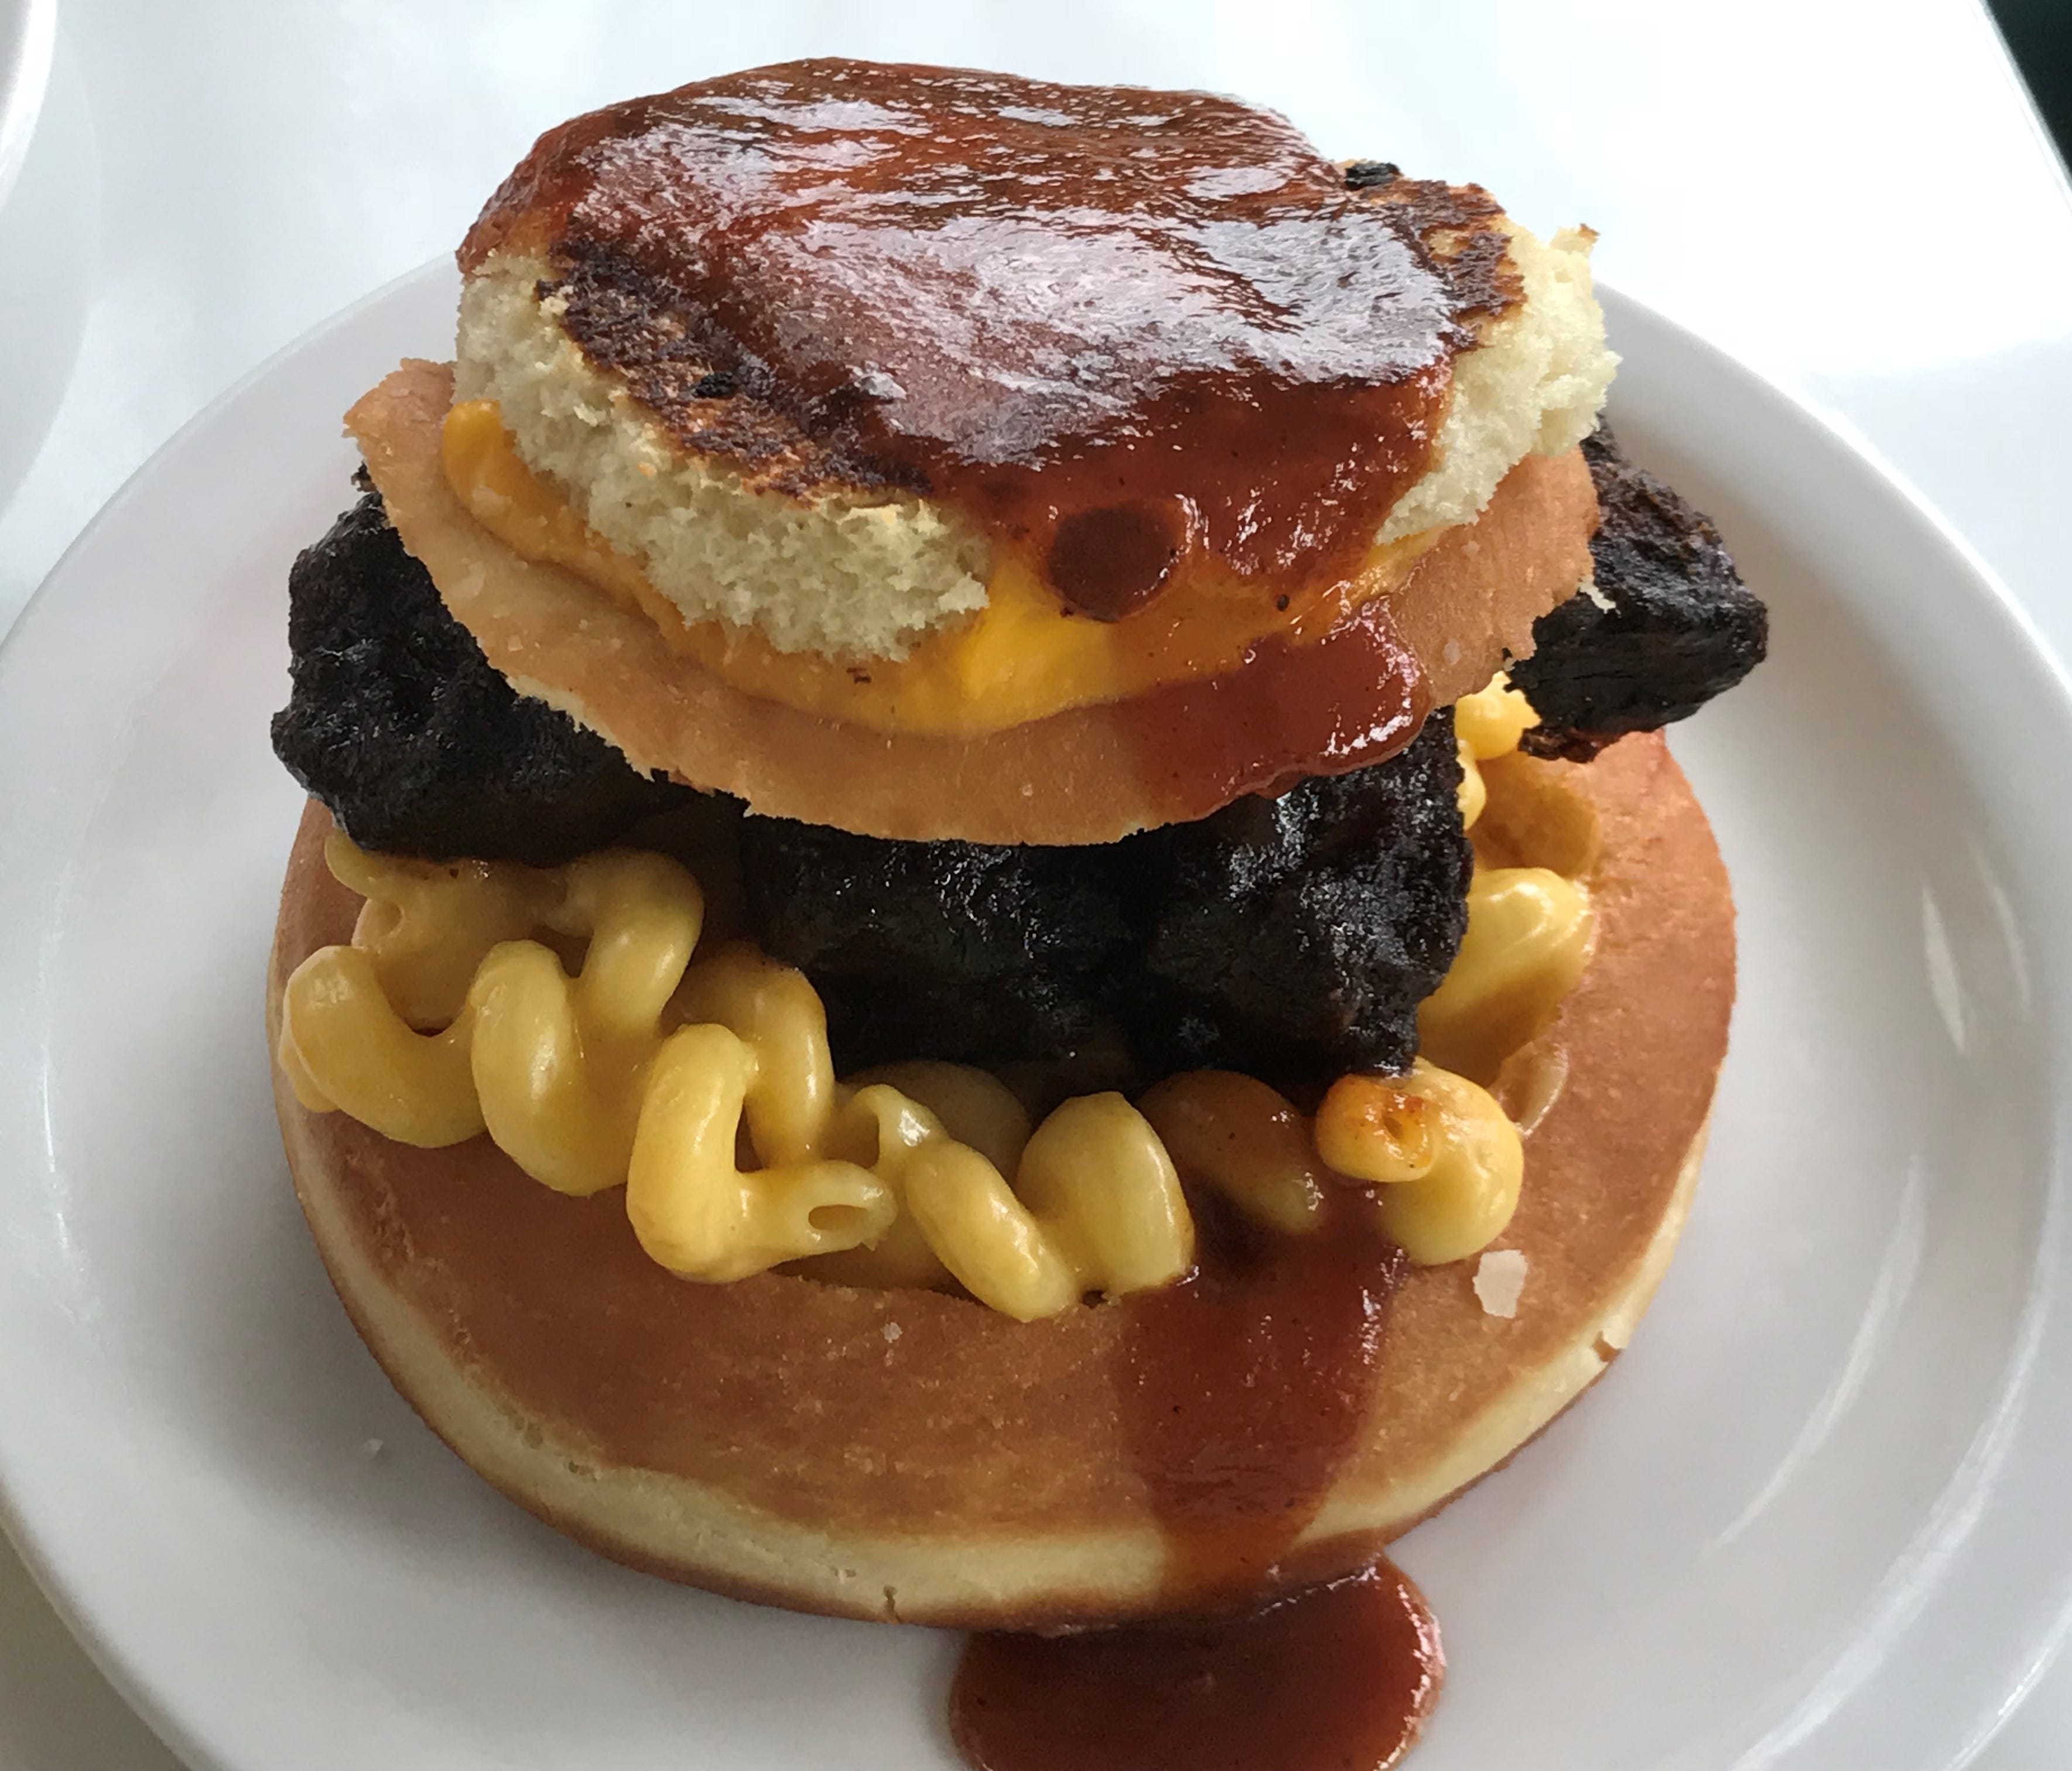 Among the savory Hi-Tops, the most popular is the Mac Rib, a fried doughnut-like pastry topped with mac and cheese and pork ribs, a pastry crown – and a mini grilled cheese sandwich.